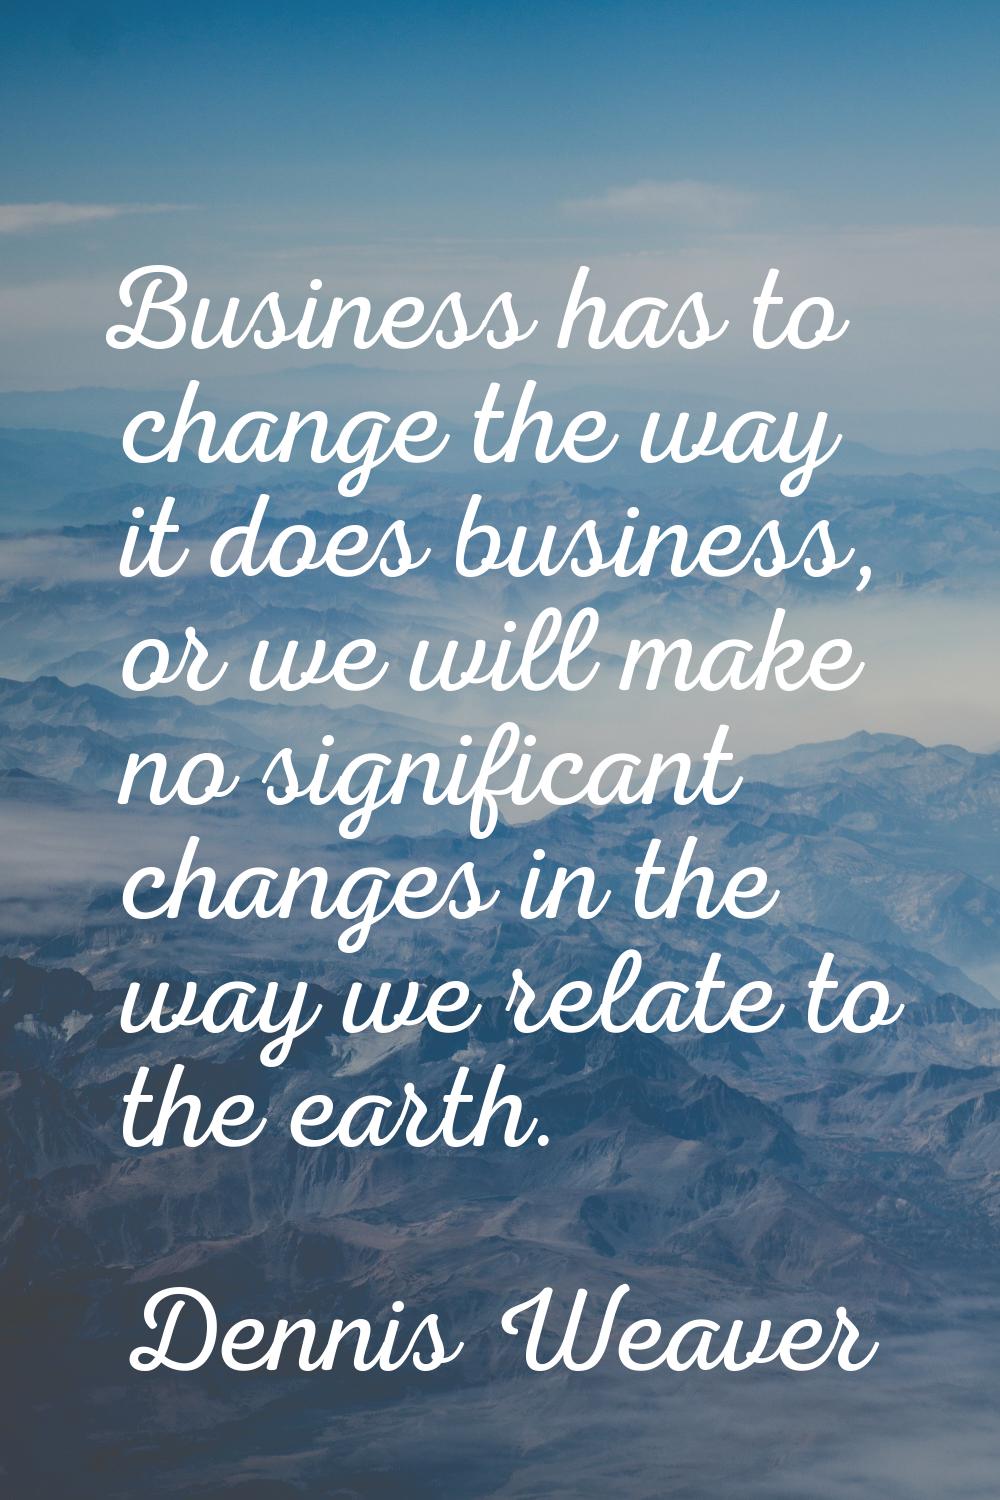 Business has to change the way it does business, or we will make no significant changes in the way 